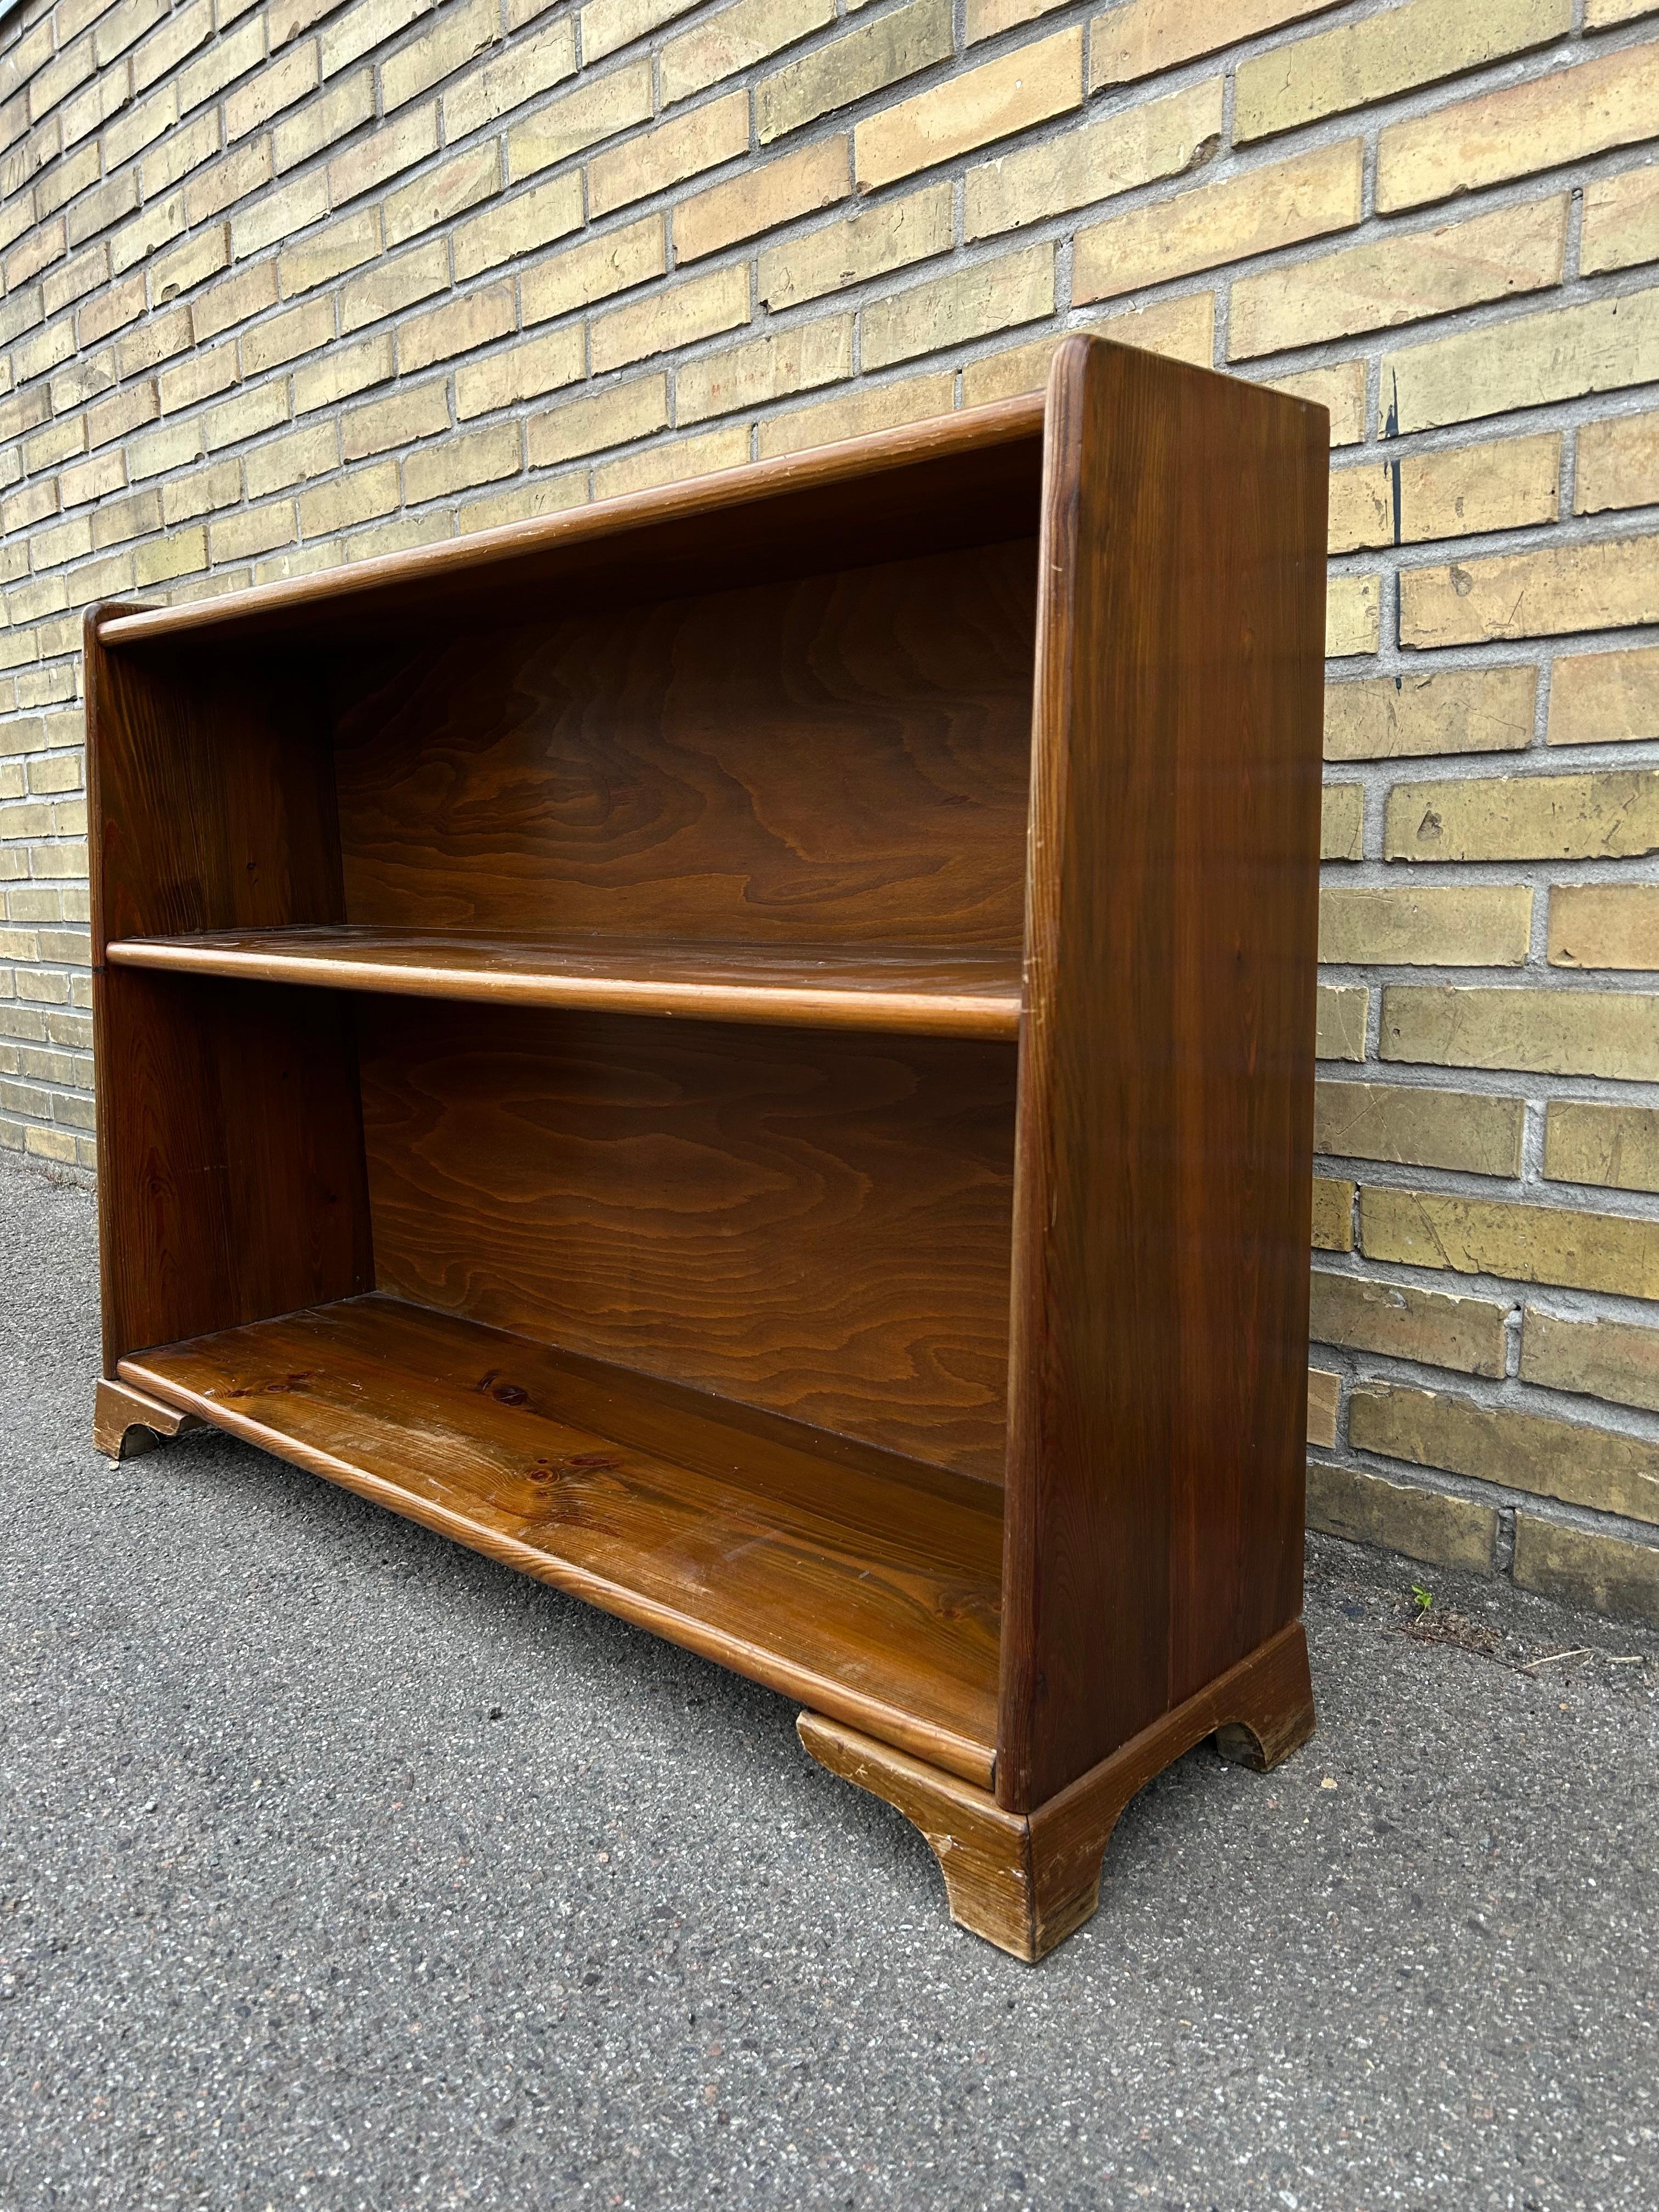 Rare patinaed book shelf by an unknown Swedish cabinetmaker in solid acid stained pine wood.
The shelf consists of two shelf’s and very art deco inspired feet and raised edges on the top of the shelf.

The book shelf if similar to pieces by